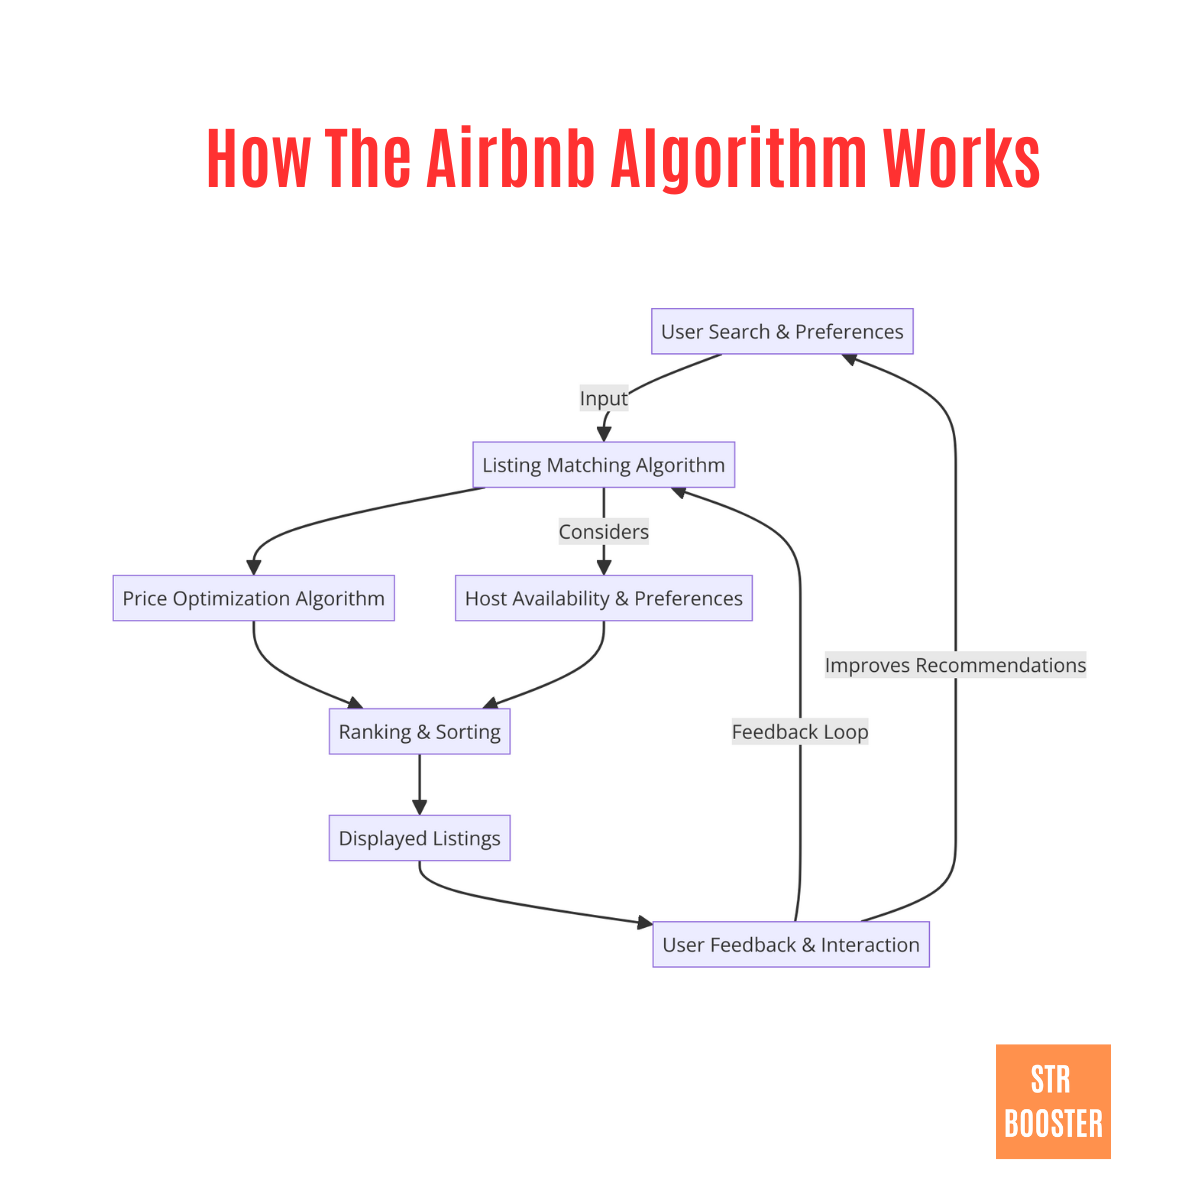 How the airbnb algorithm works